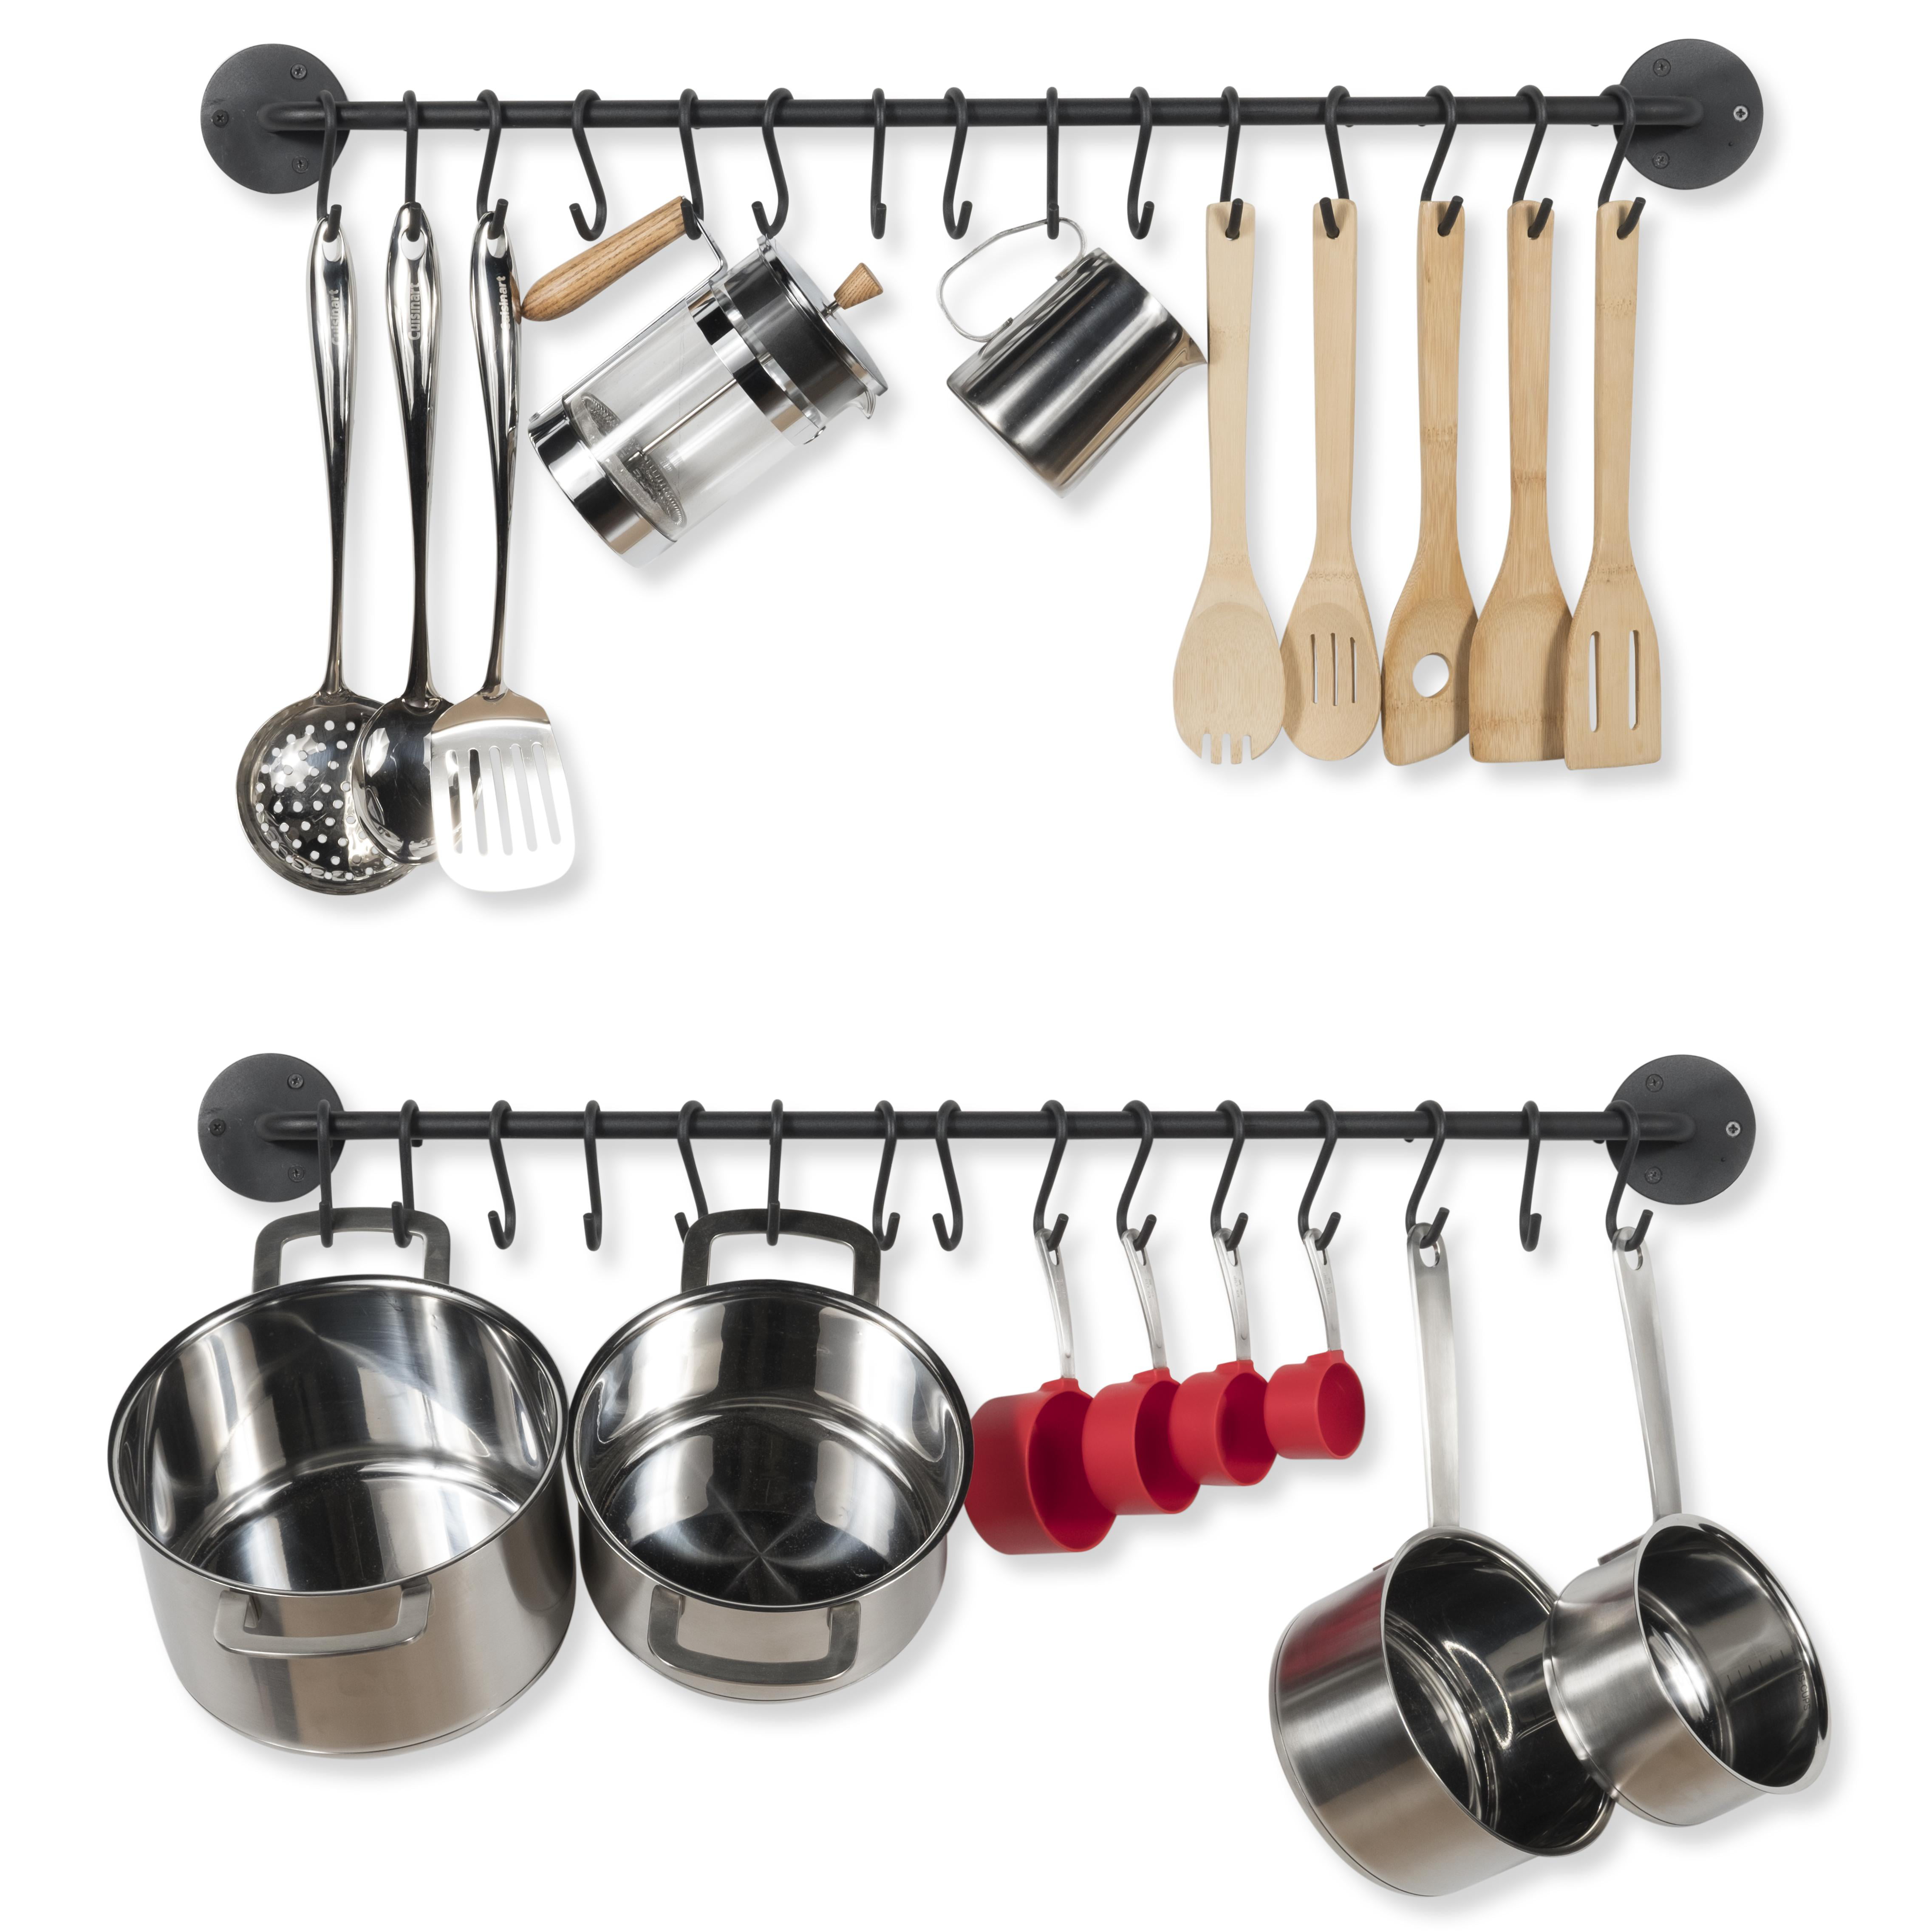 15x Stainless Steel S Hooks Kitchen Meat Pan Utensil Clothes Hanger Gift 